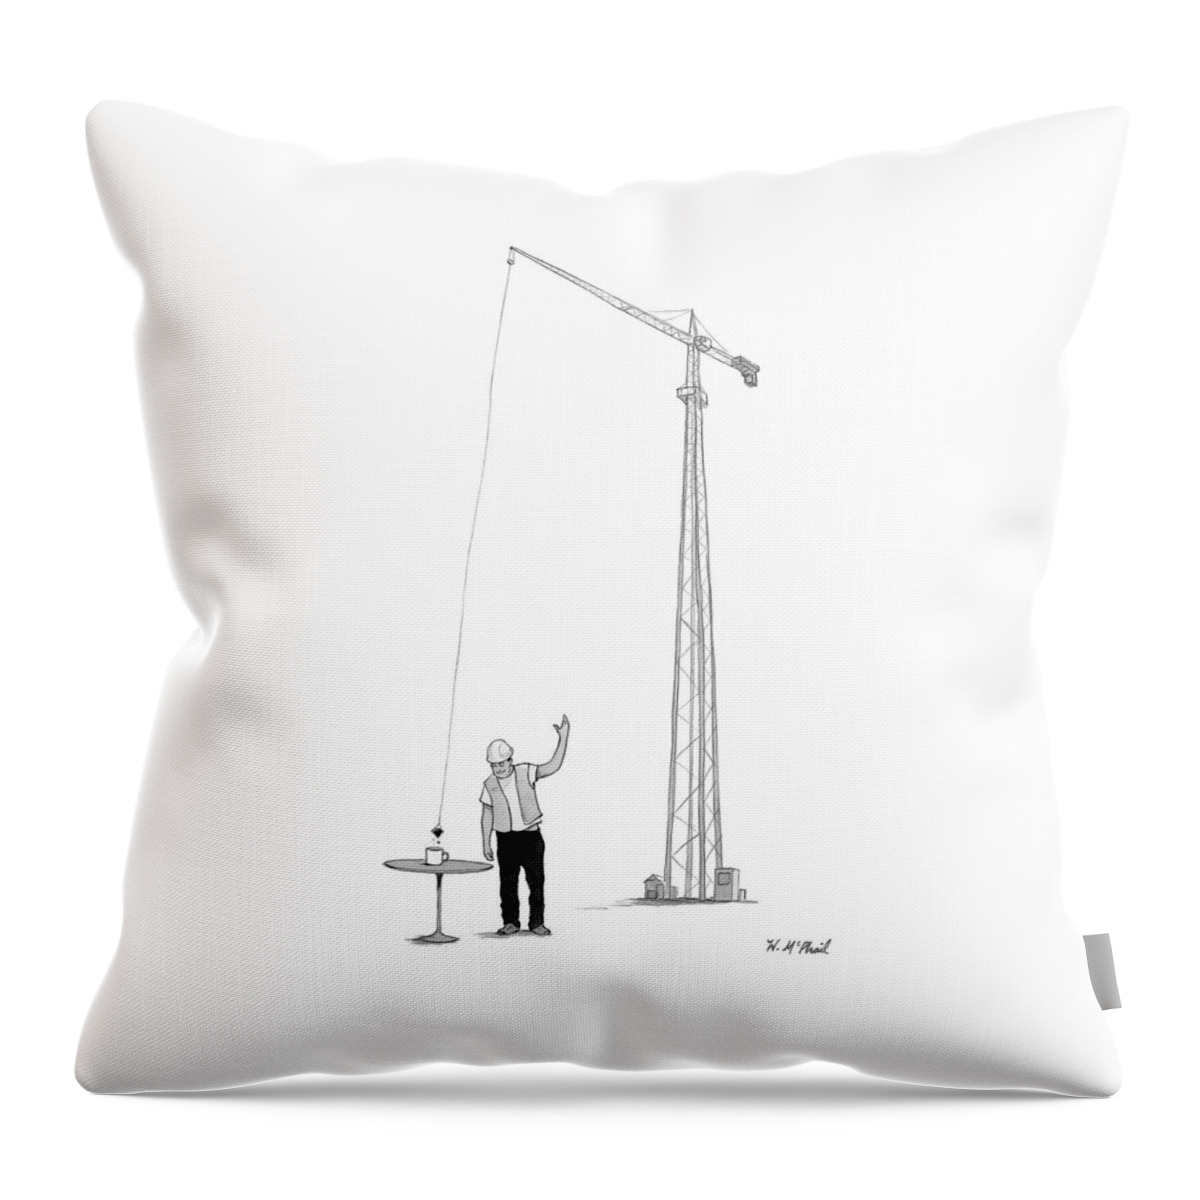 New Yorker July 26, 2021 Throw Pillow